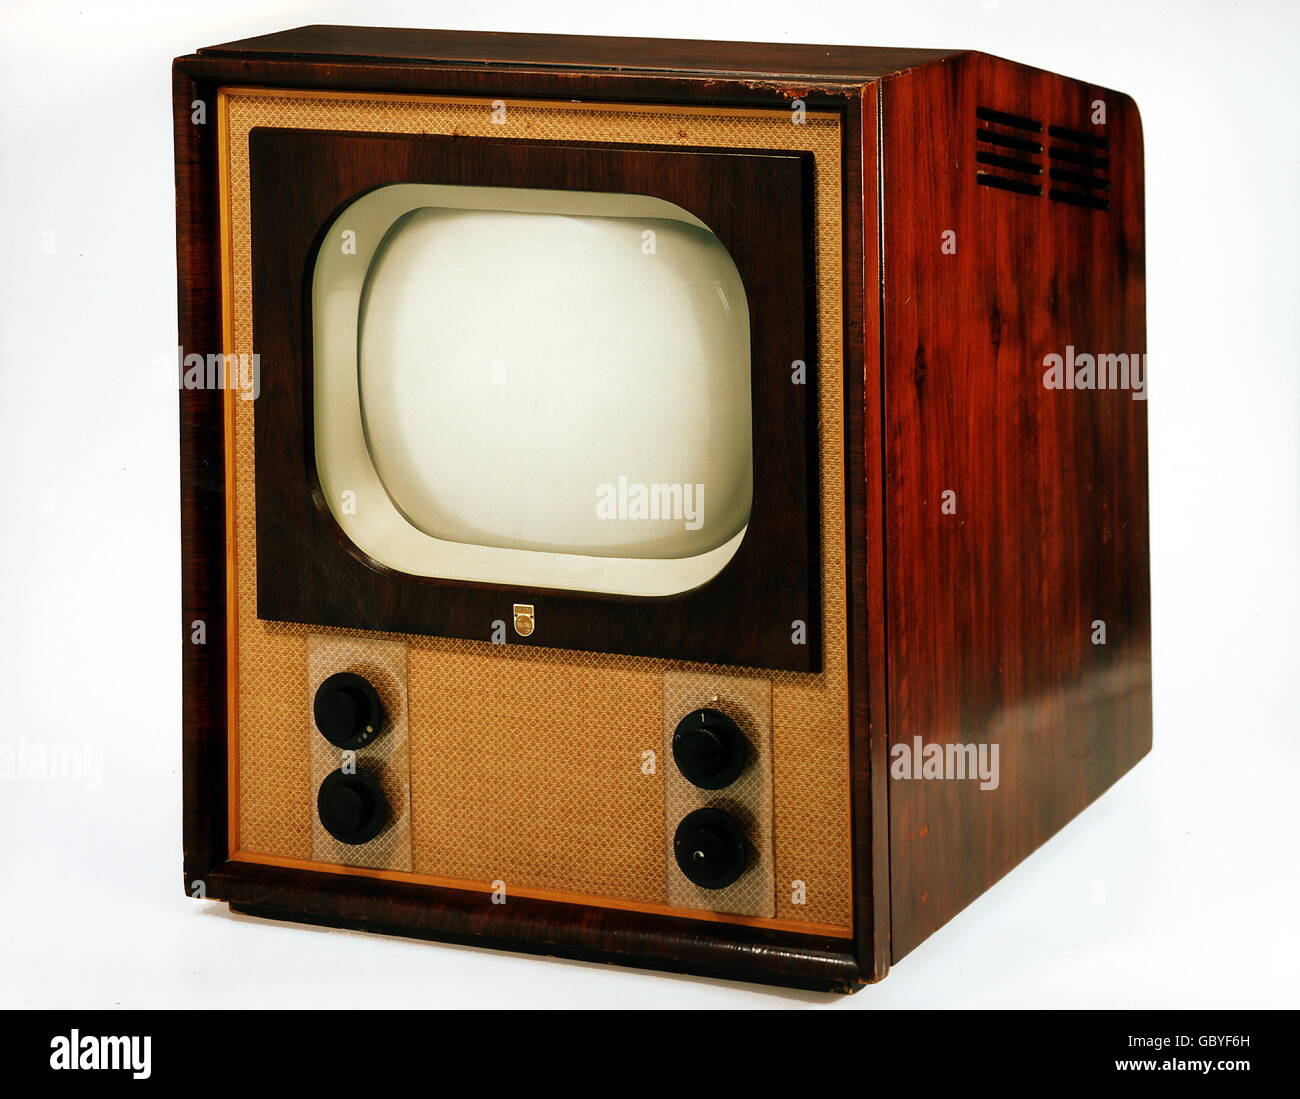 broadcast, television, Philips TX 500, 1951, 1950s, 50s, 20th century, historic, historical, W.M. Weber collection, television set, TV set, TV, television sets, TV sets, TVs, home electronics, consumer electronics, entertainment electronics, home entertainment, chest, electric, electrical device, devices, Additional-Rights-Clearences-Not Available Stock Photo